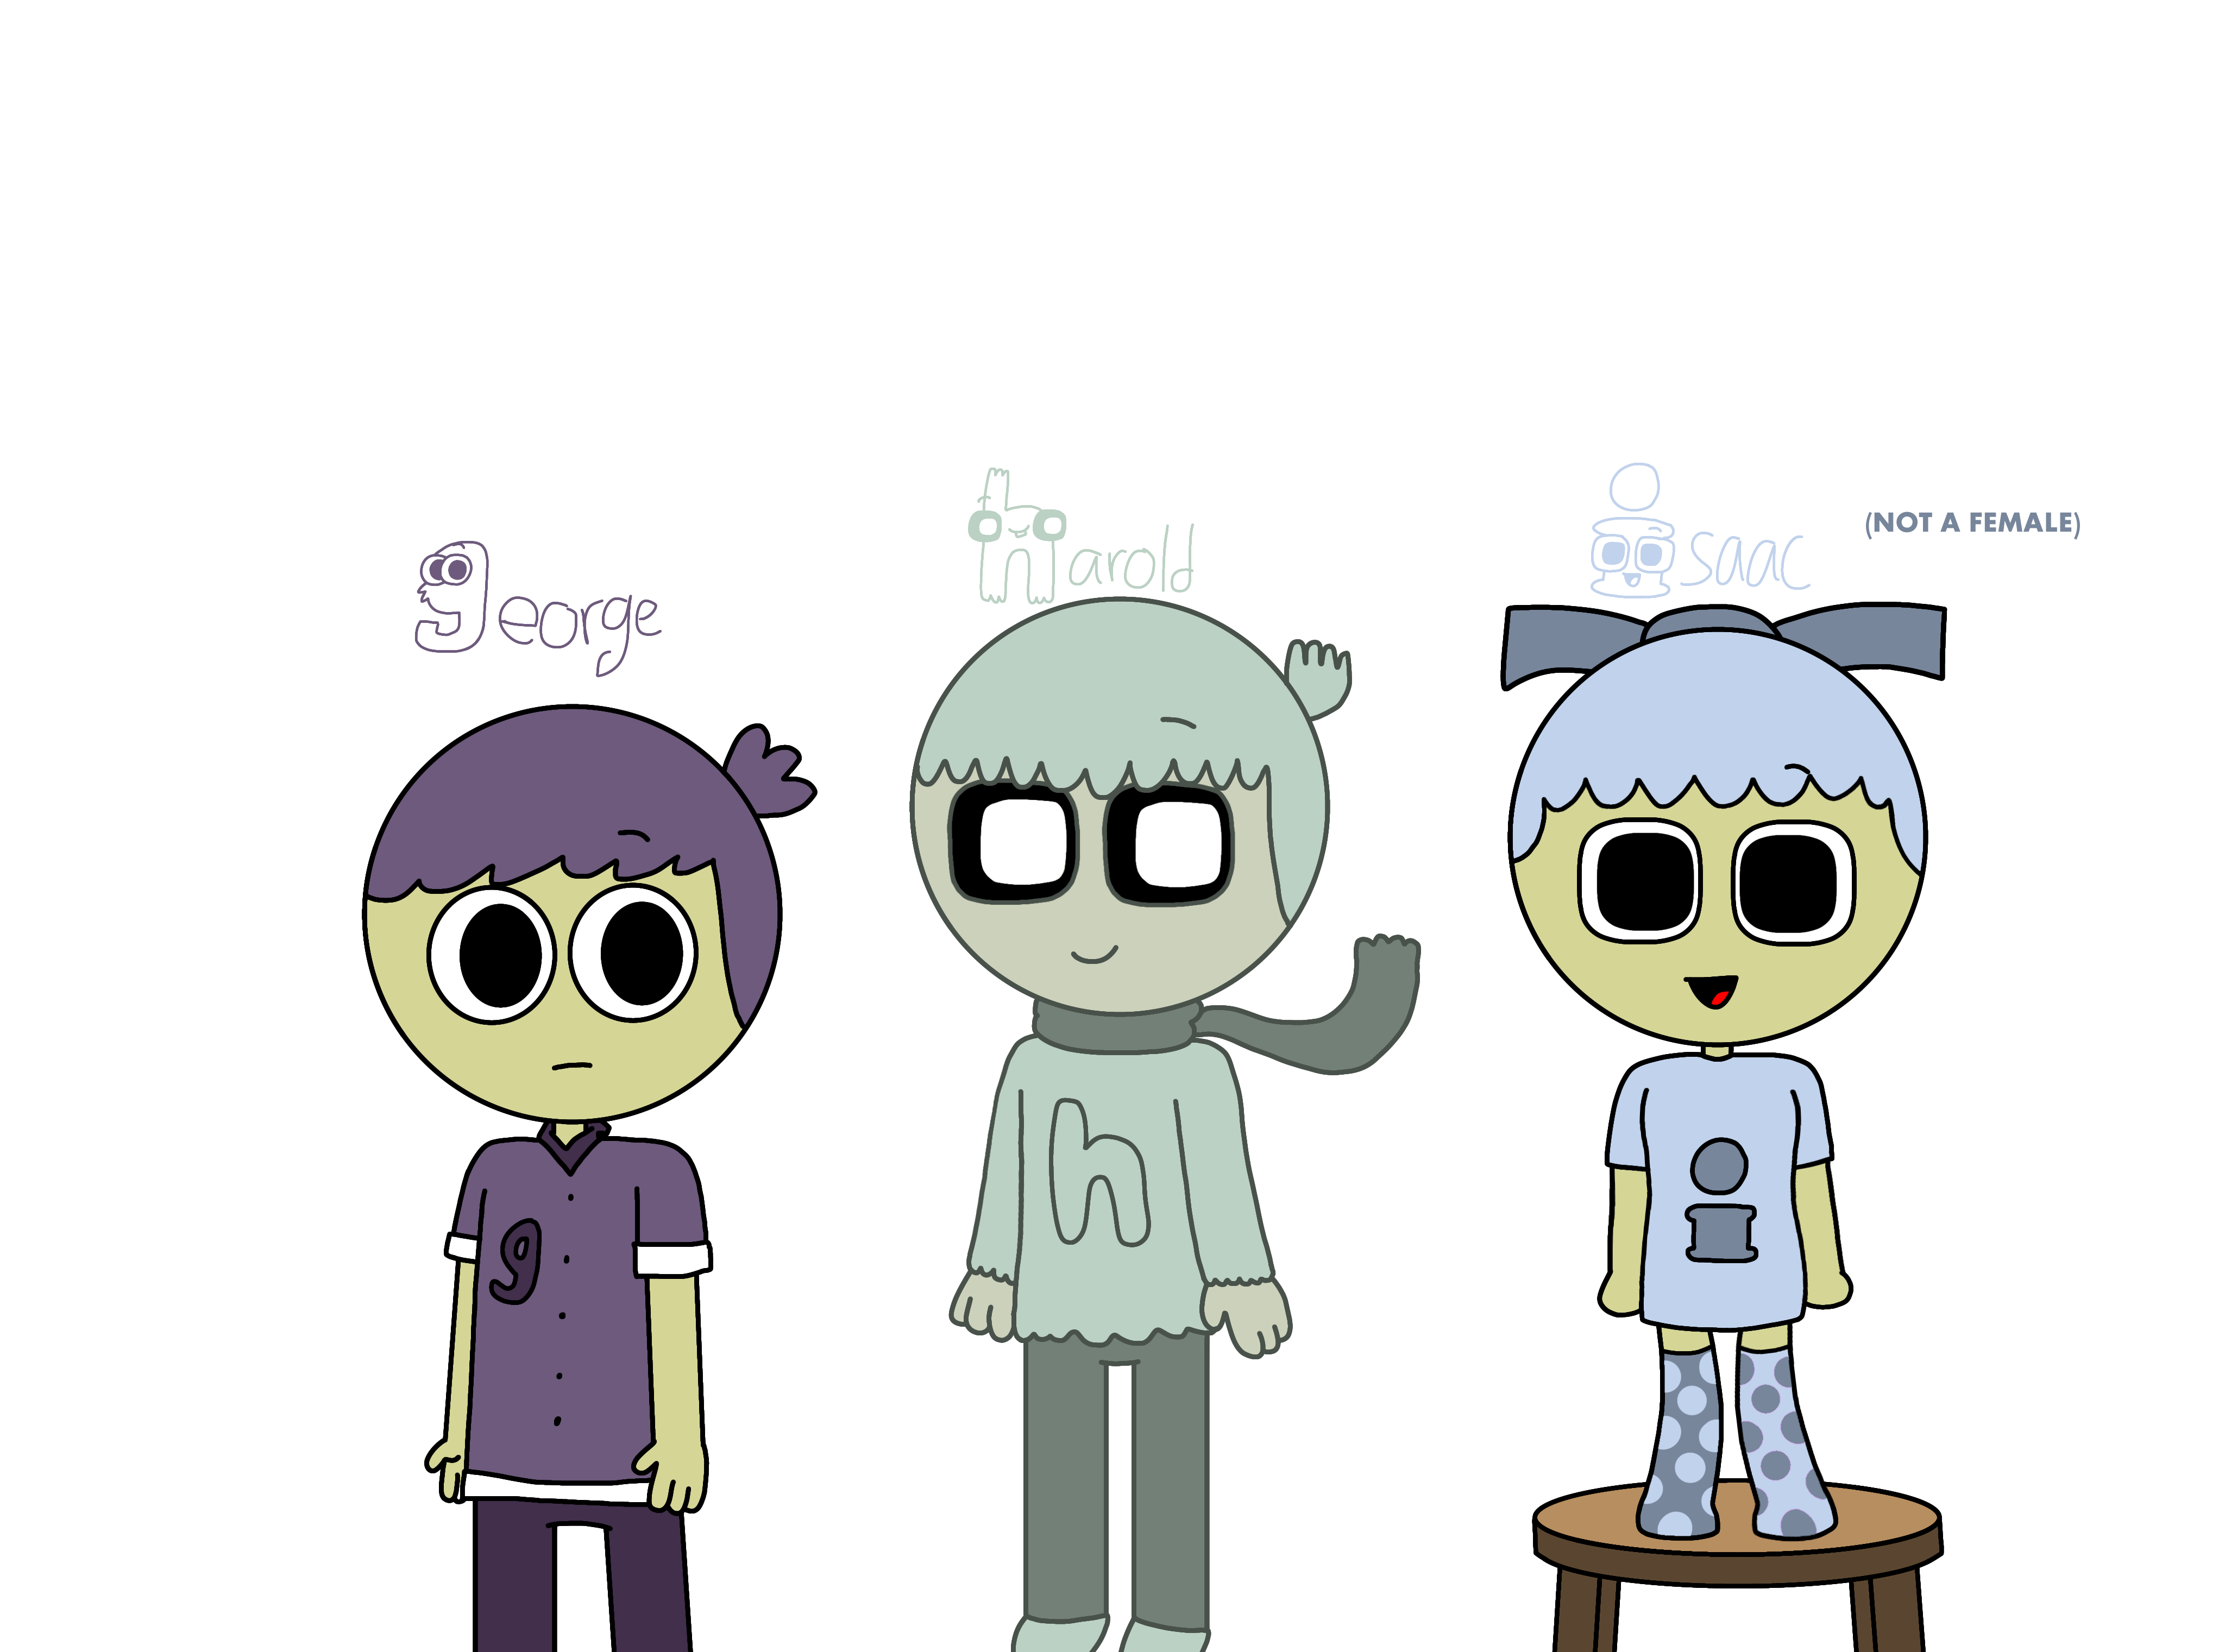 Humanized Alphabet lore lowercase and sorry for not posting in all yea, Alphabet  Lore S